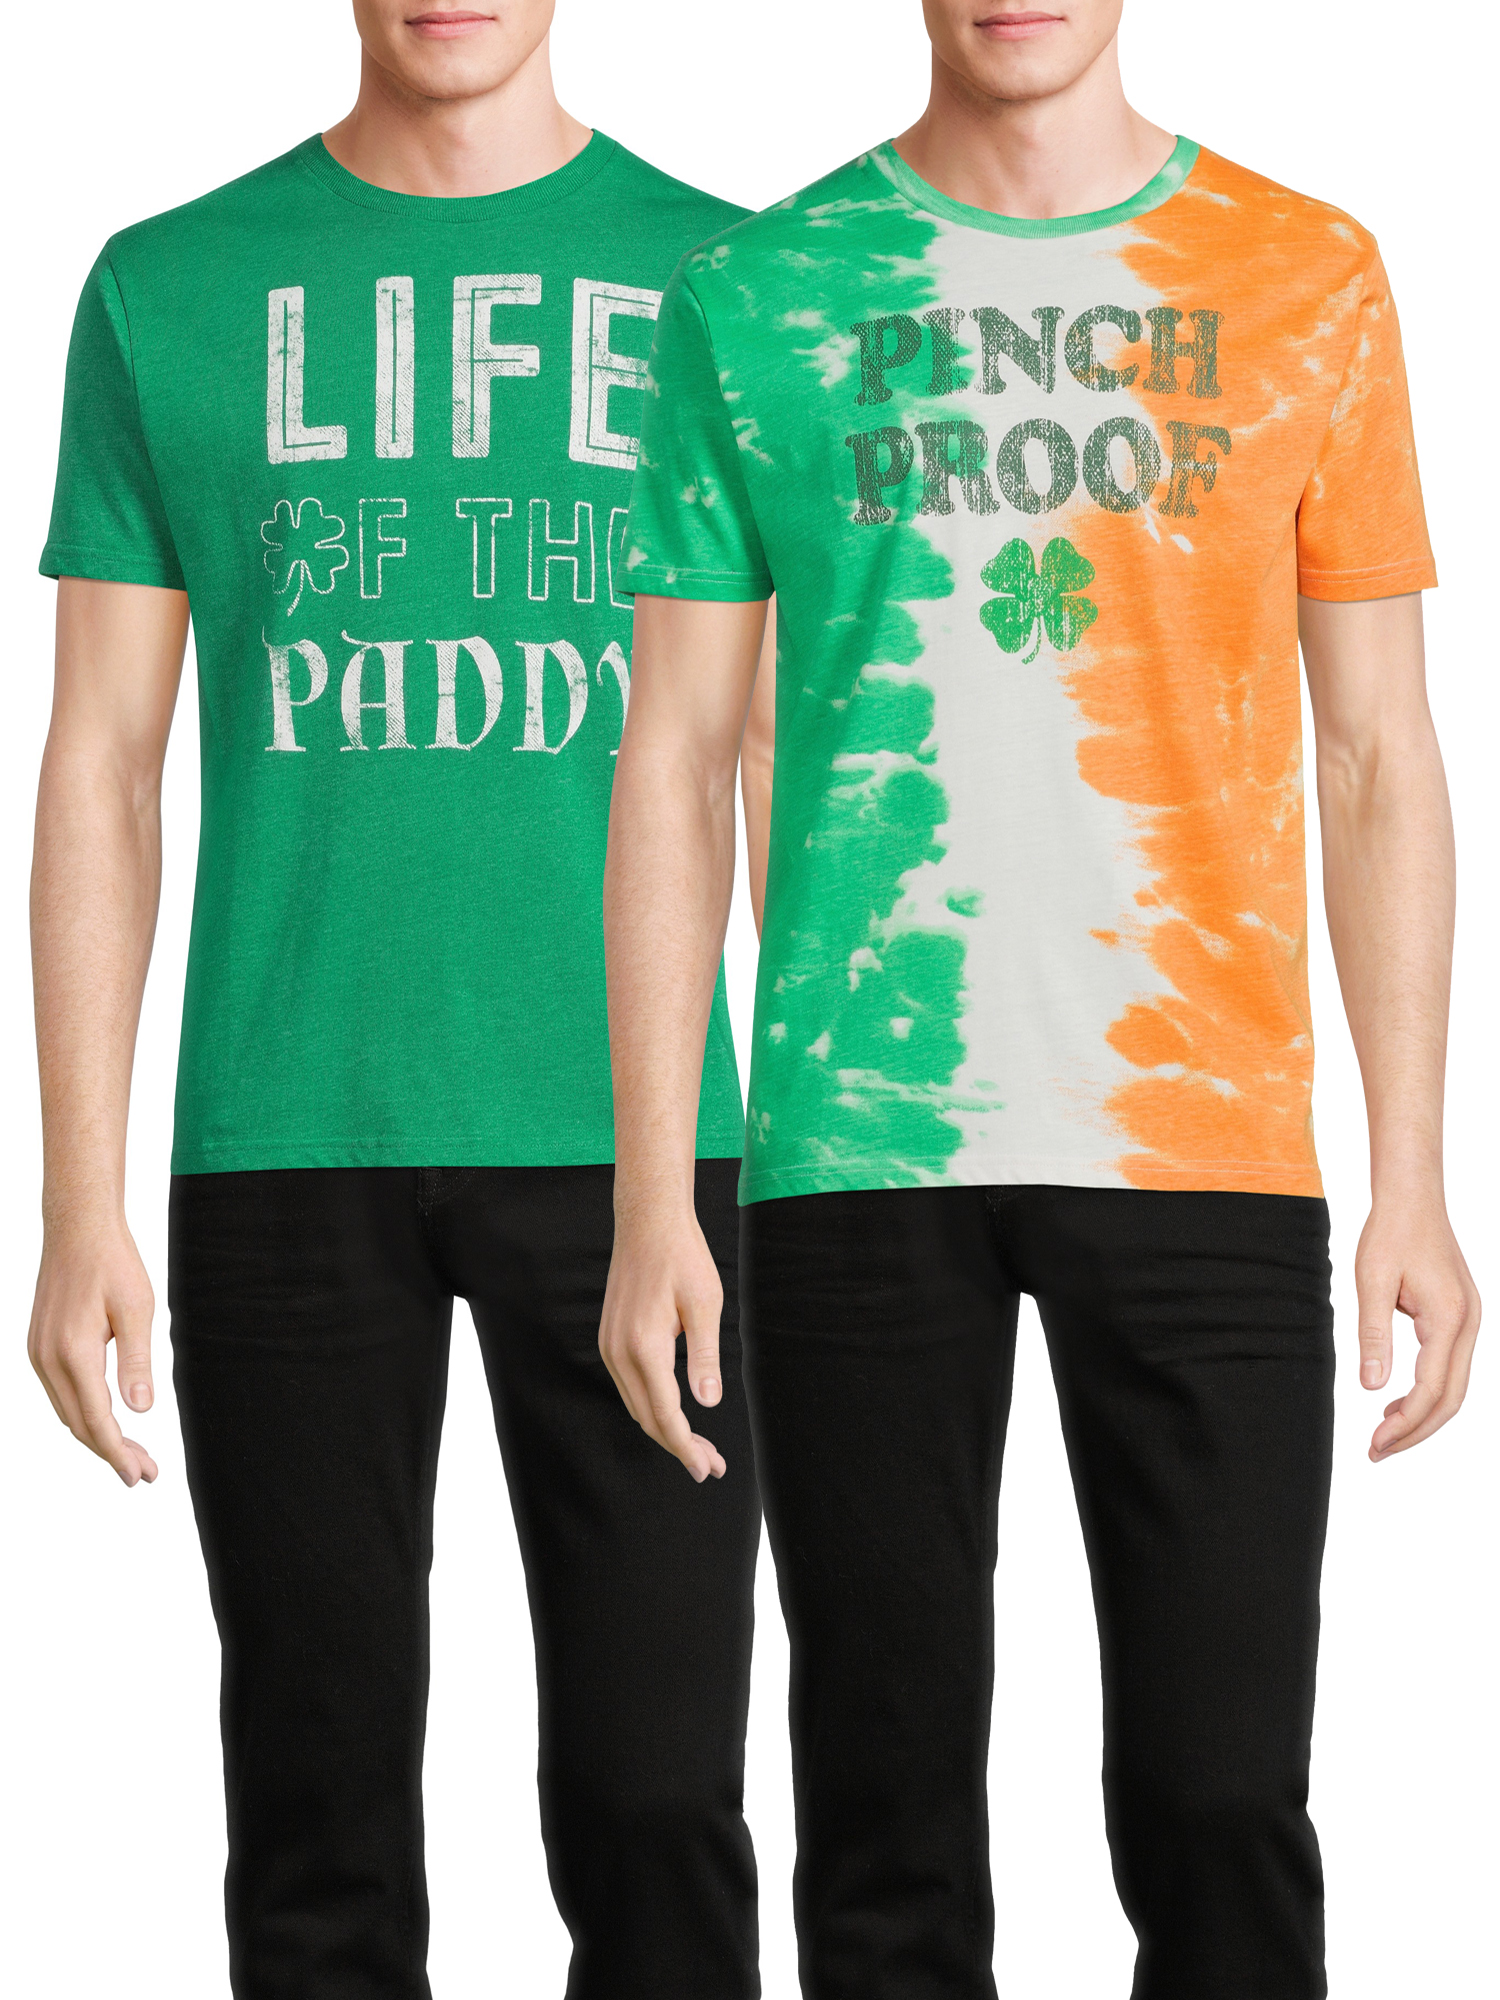 St. Patrick's Day Men's & Big Men's Life of the Paddy and Pinch Proof Graphic Tee Bundle, 2-Pack - image 1 of 6